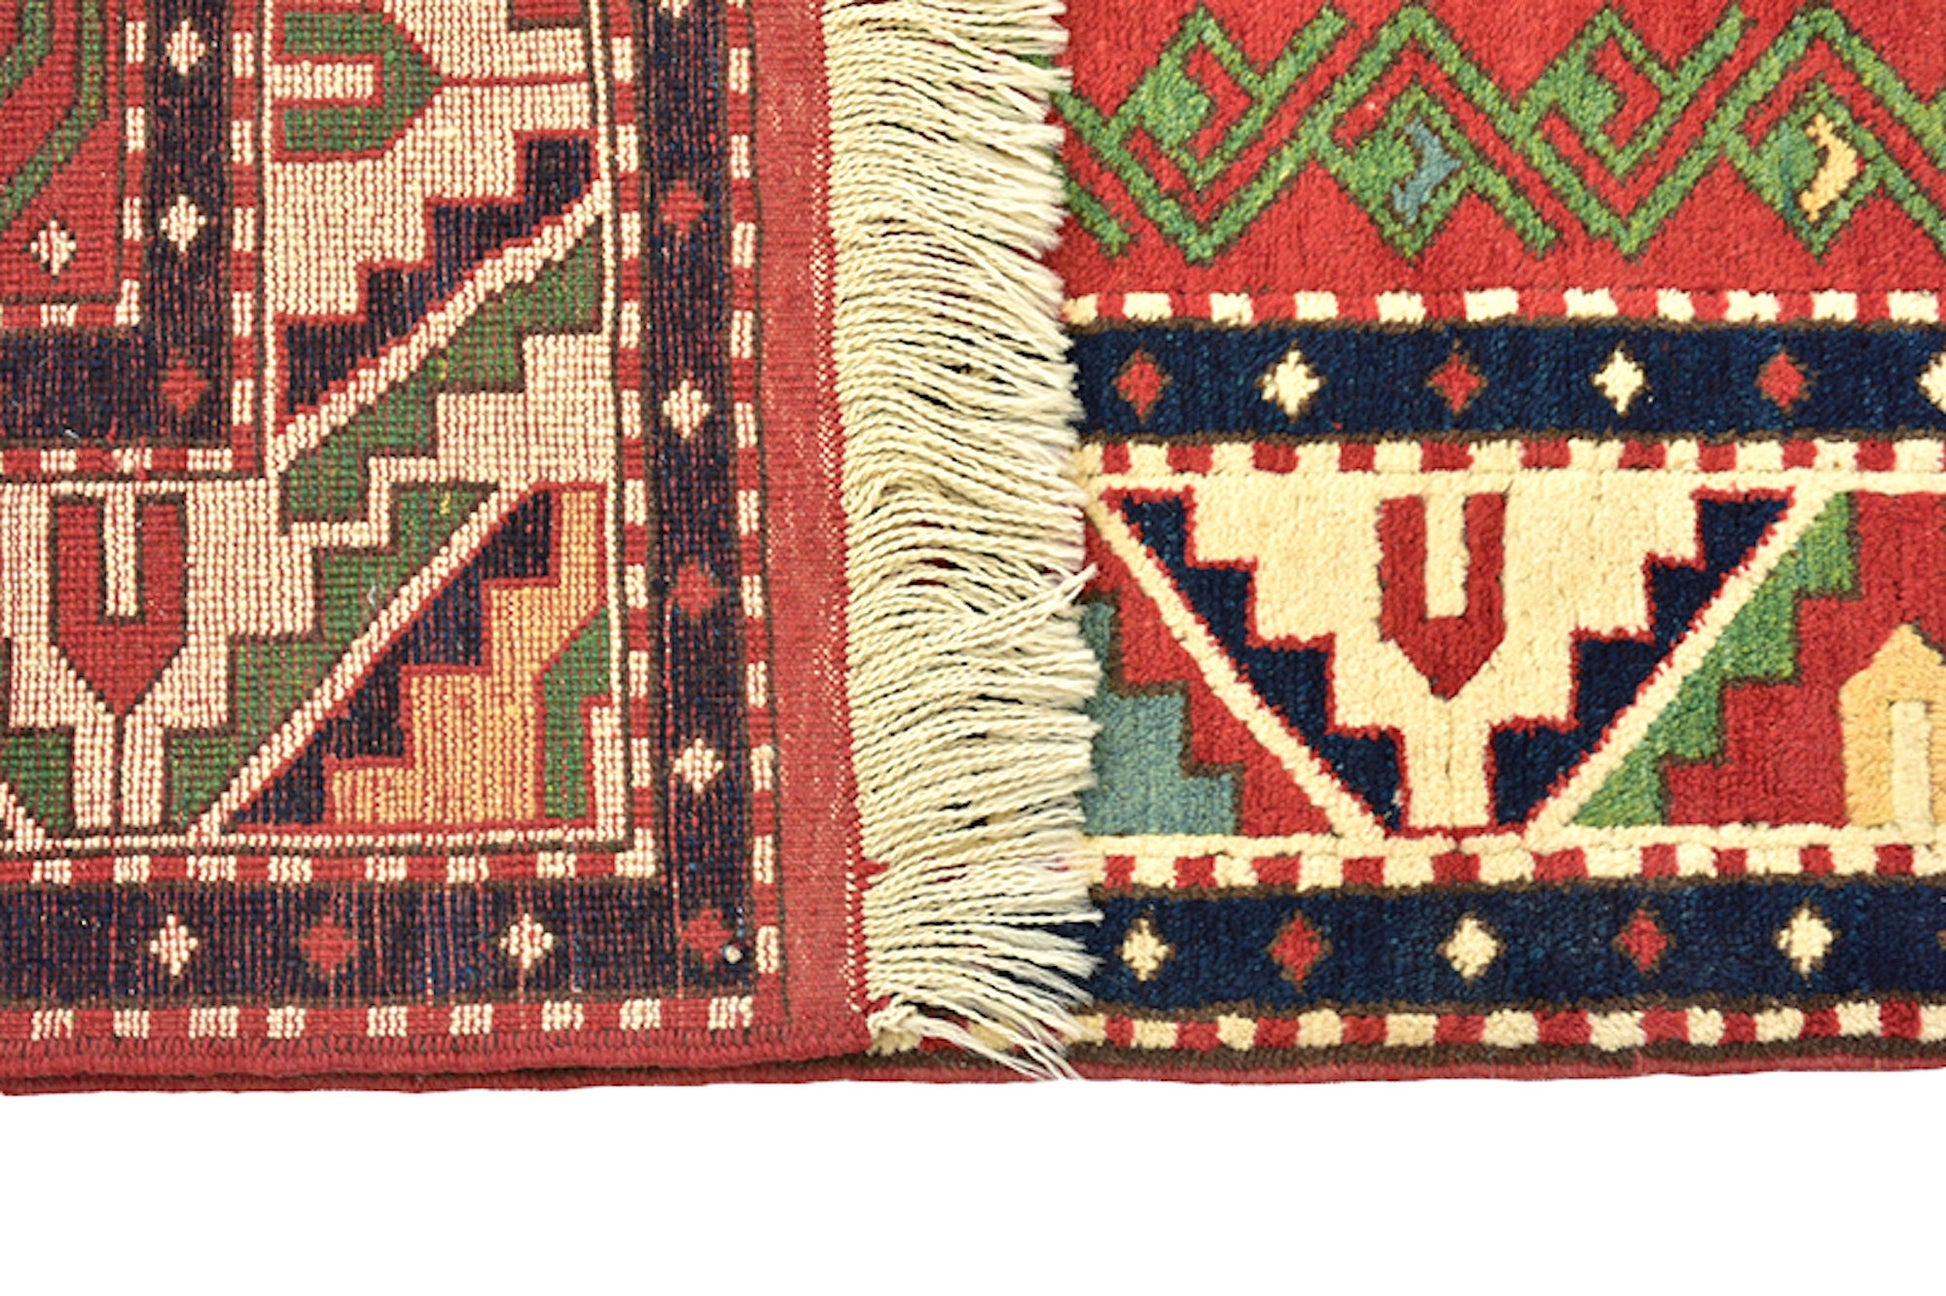 Red Southwestern 6x9 Turkish Kazak Rug | Geometric Tribal Design | Bright Red with Beige Green Medallions | Hand Knotted Antique Wool Rug